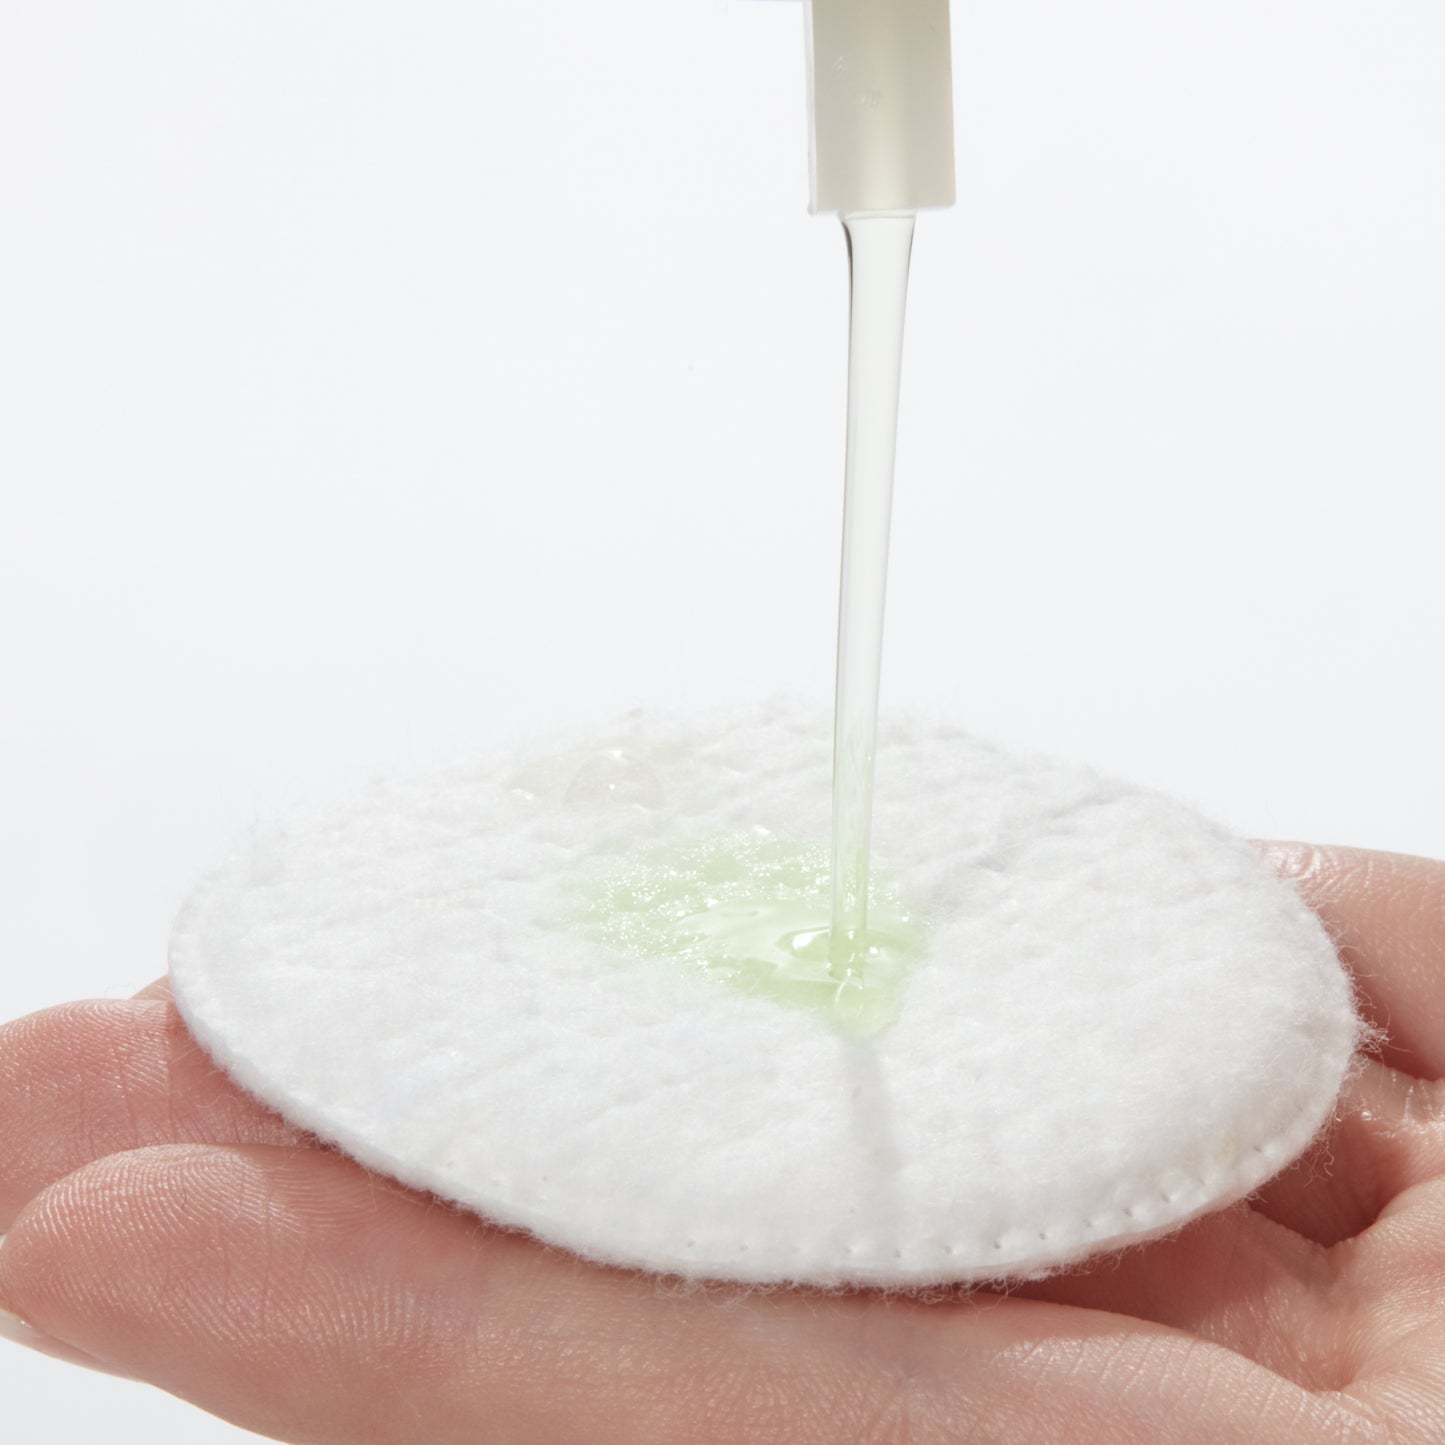 Demonstration showing how to use Aloe Vera Toning Lotion on a cotton pad